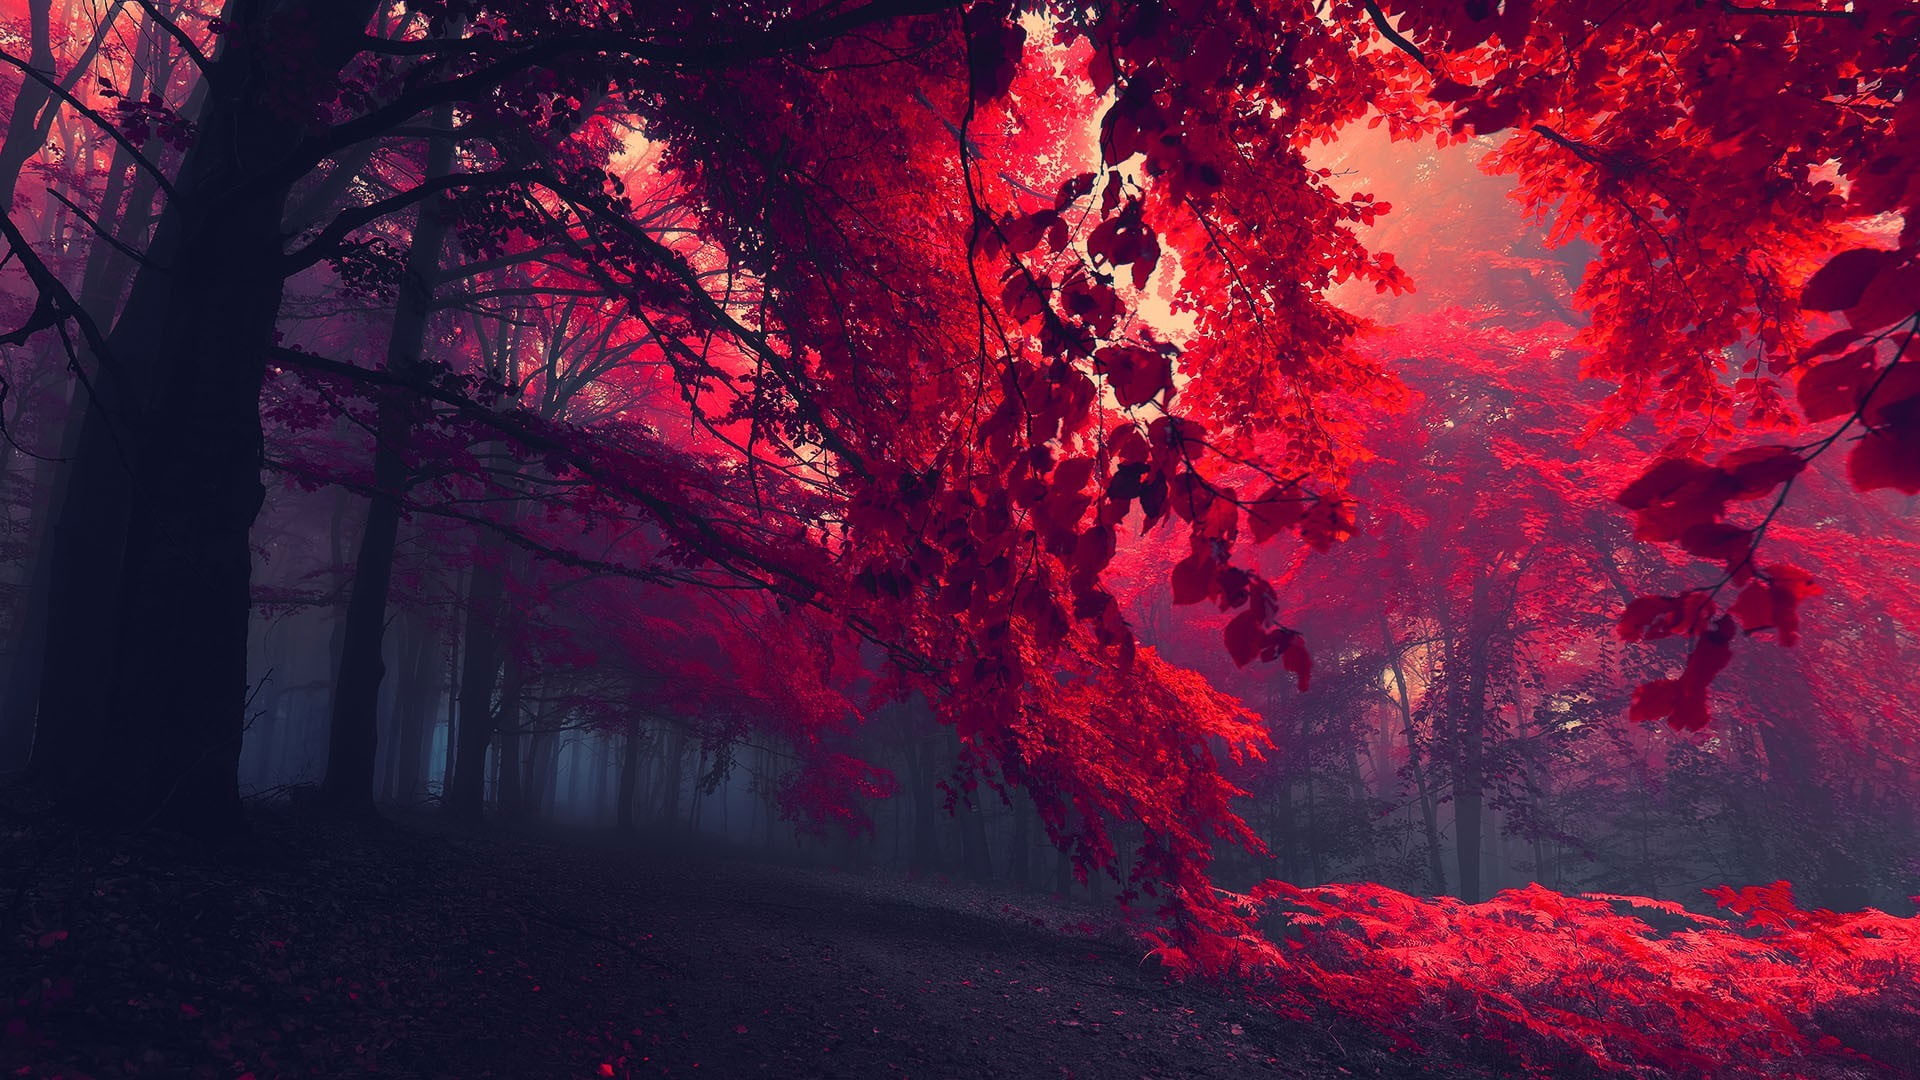 Black and red trees wallpaper, sun rays through red trees, dark